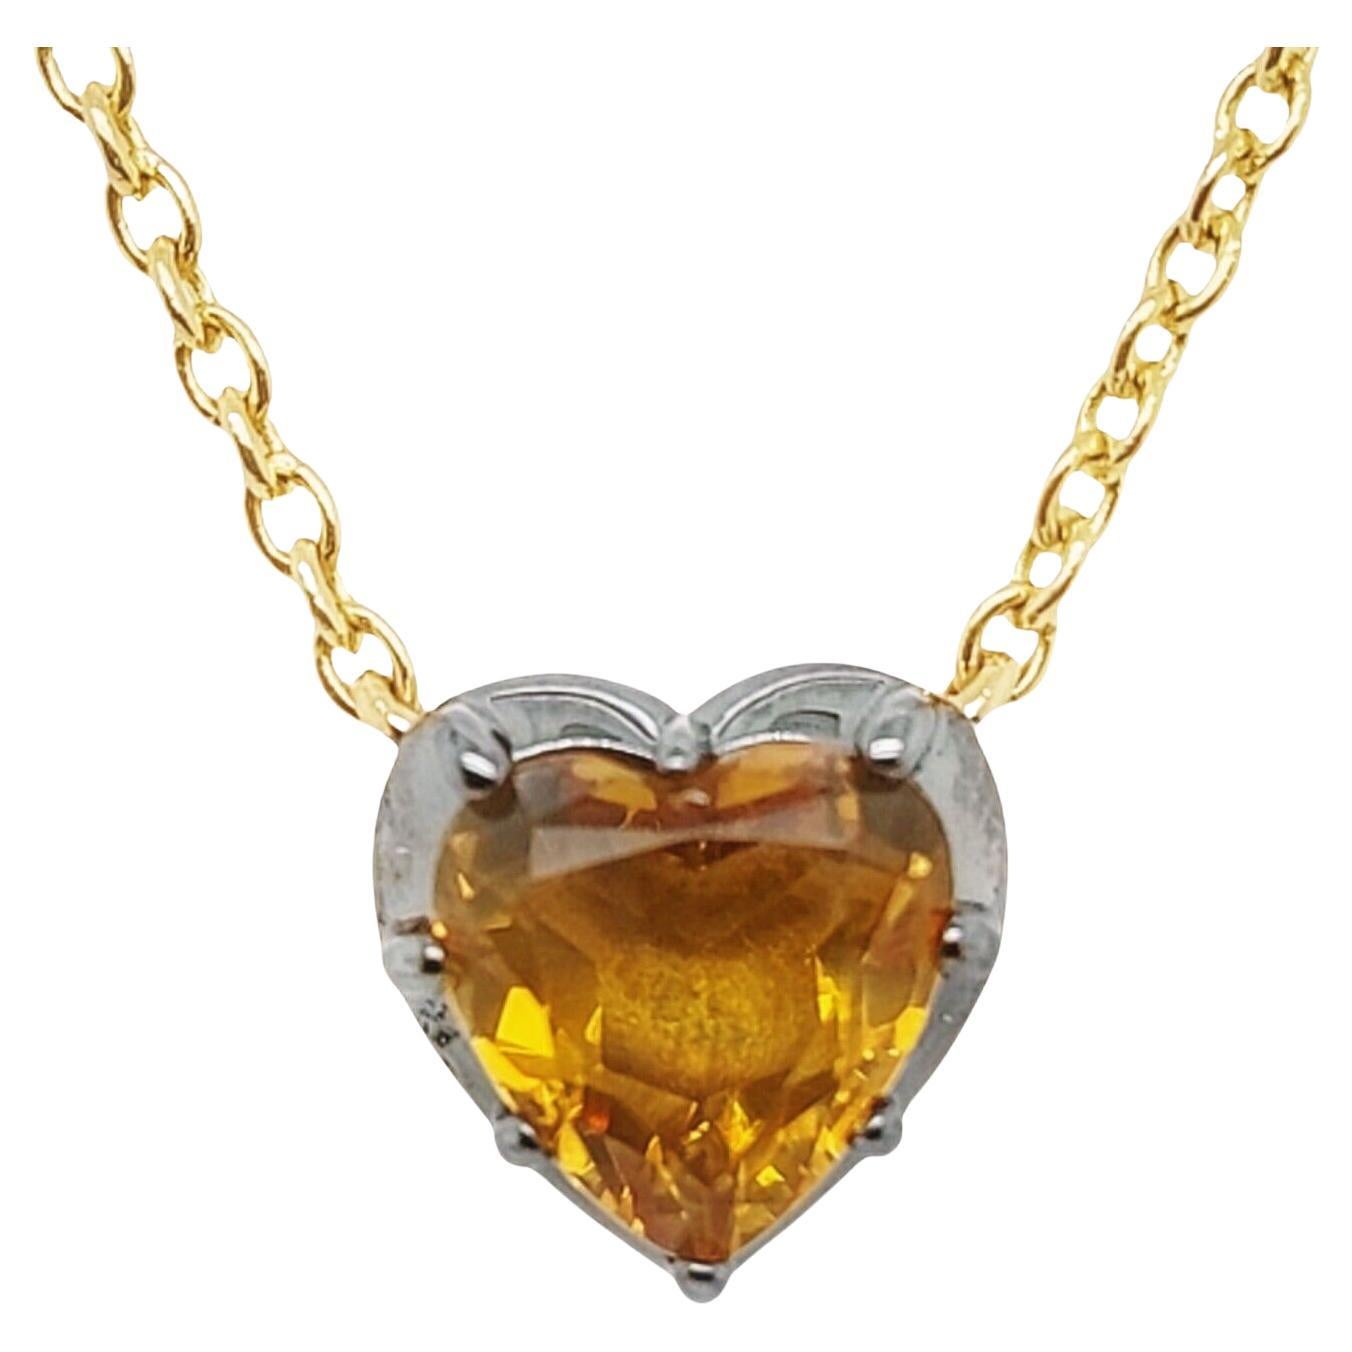 2.5ct Citrine Heart Set in 14ct Yellow Gold Chain